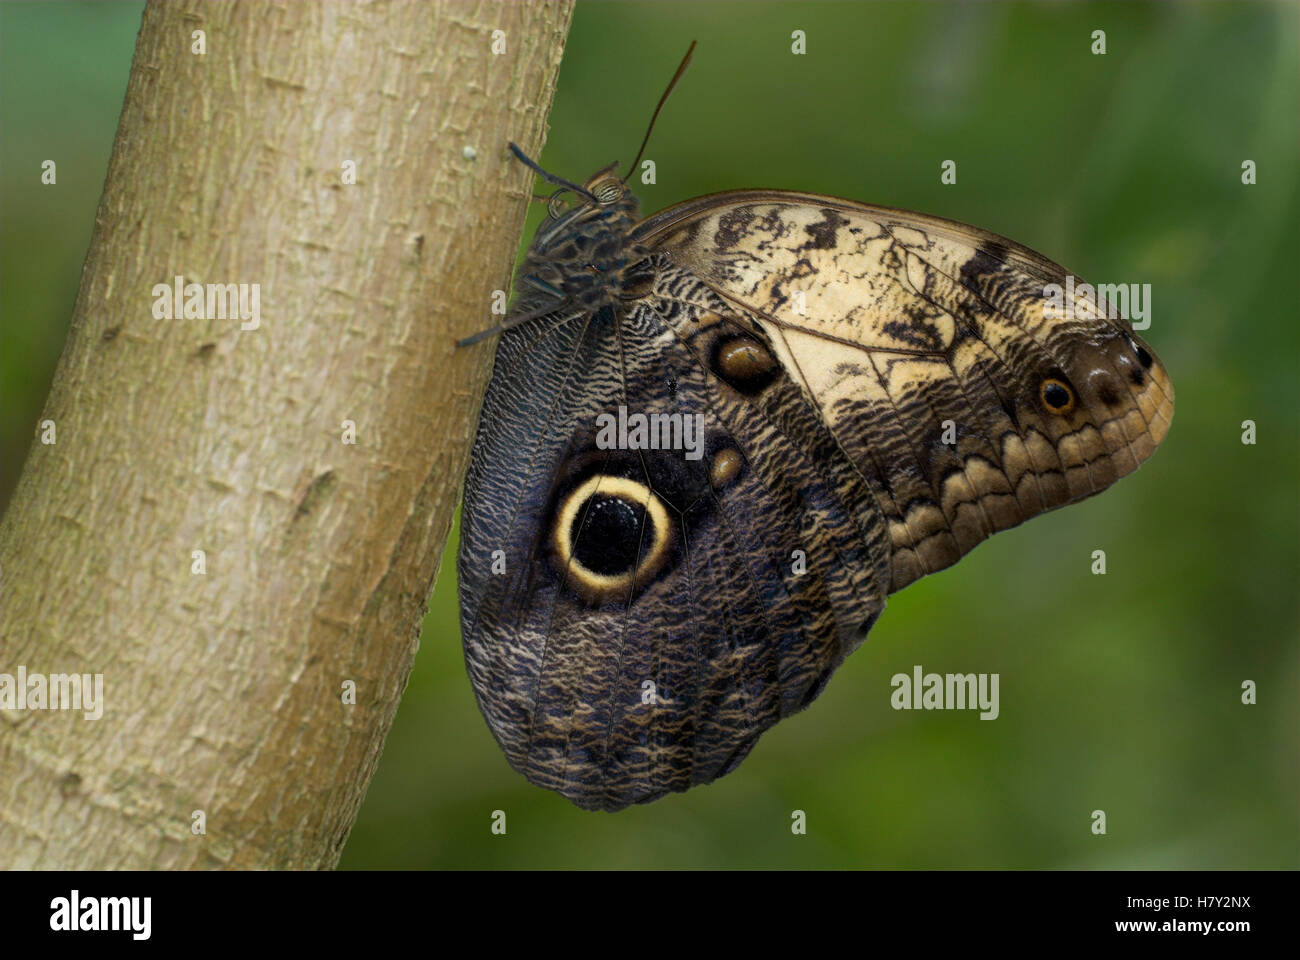 Owl Butterfly Caligo species perched on tree trunk Stock Photo